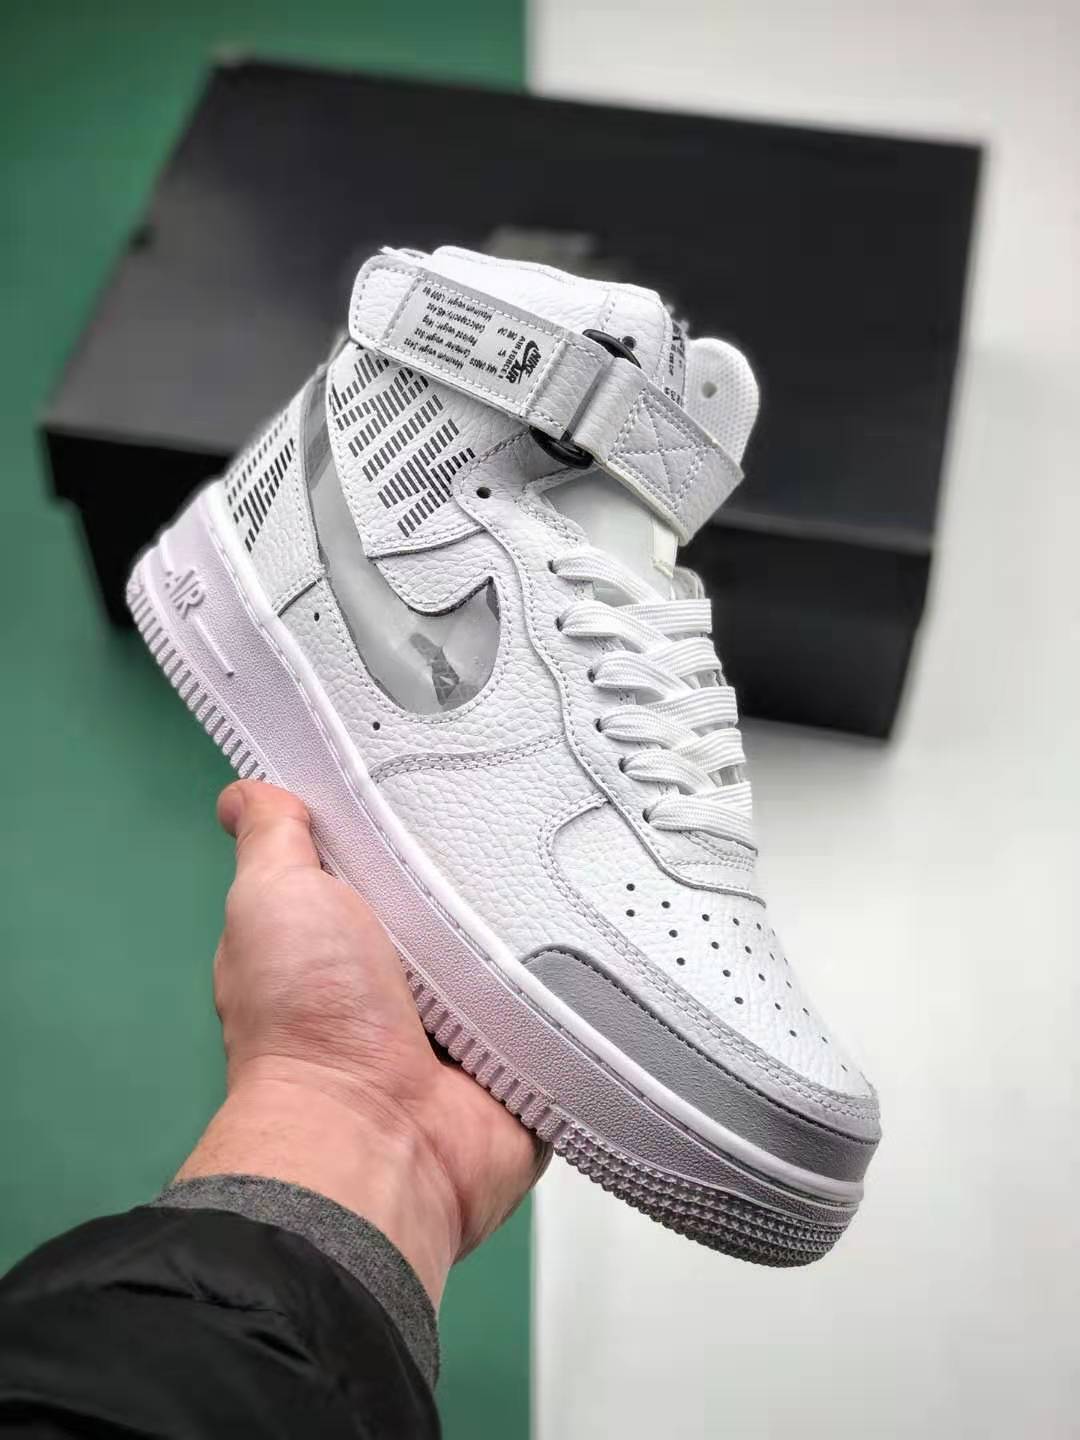 Nike Air Force 1 High Under Construction White CQ0449-100 | Stylish and durable sneakers for men | Limited edition collection